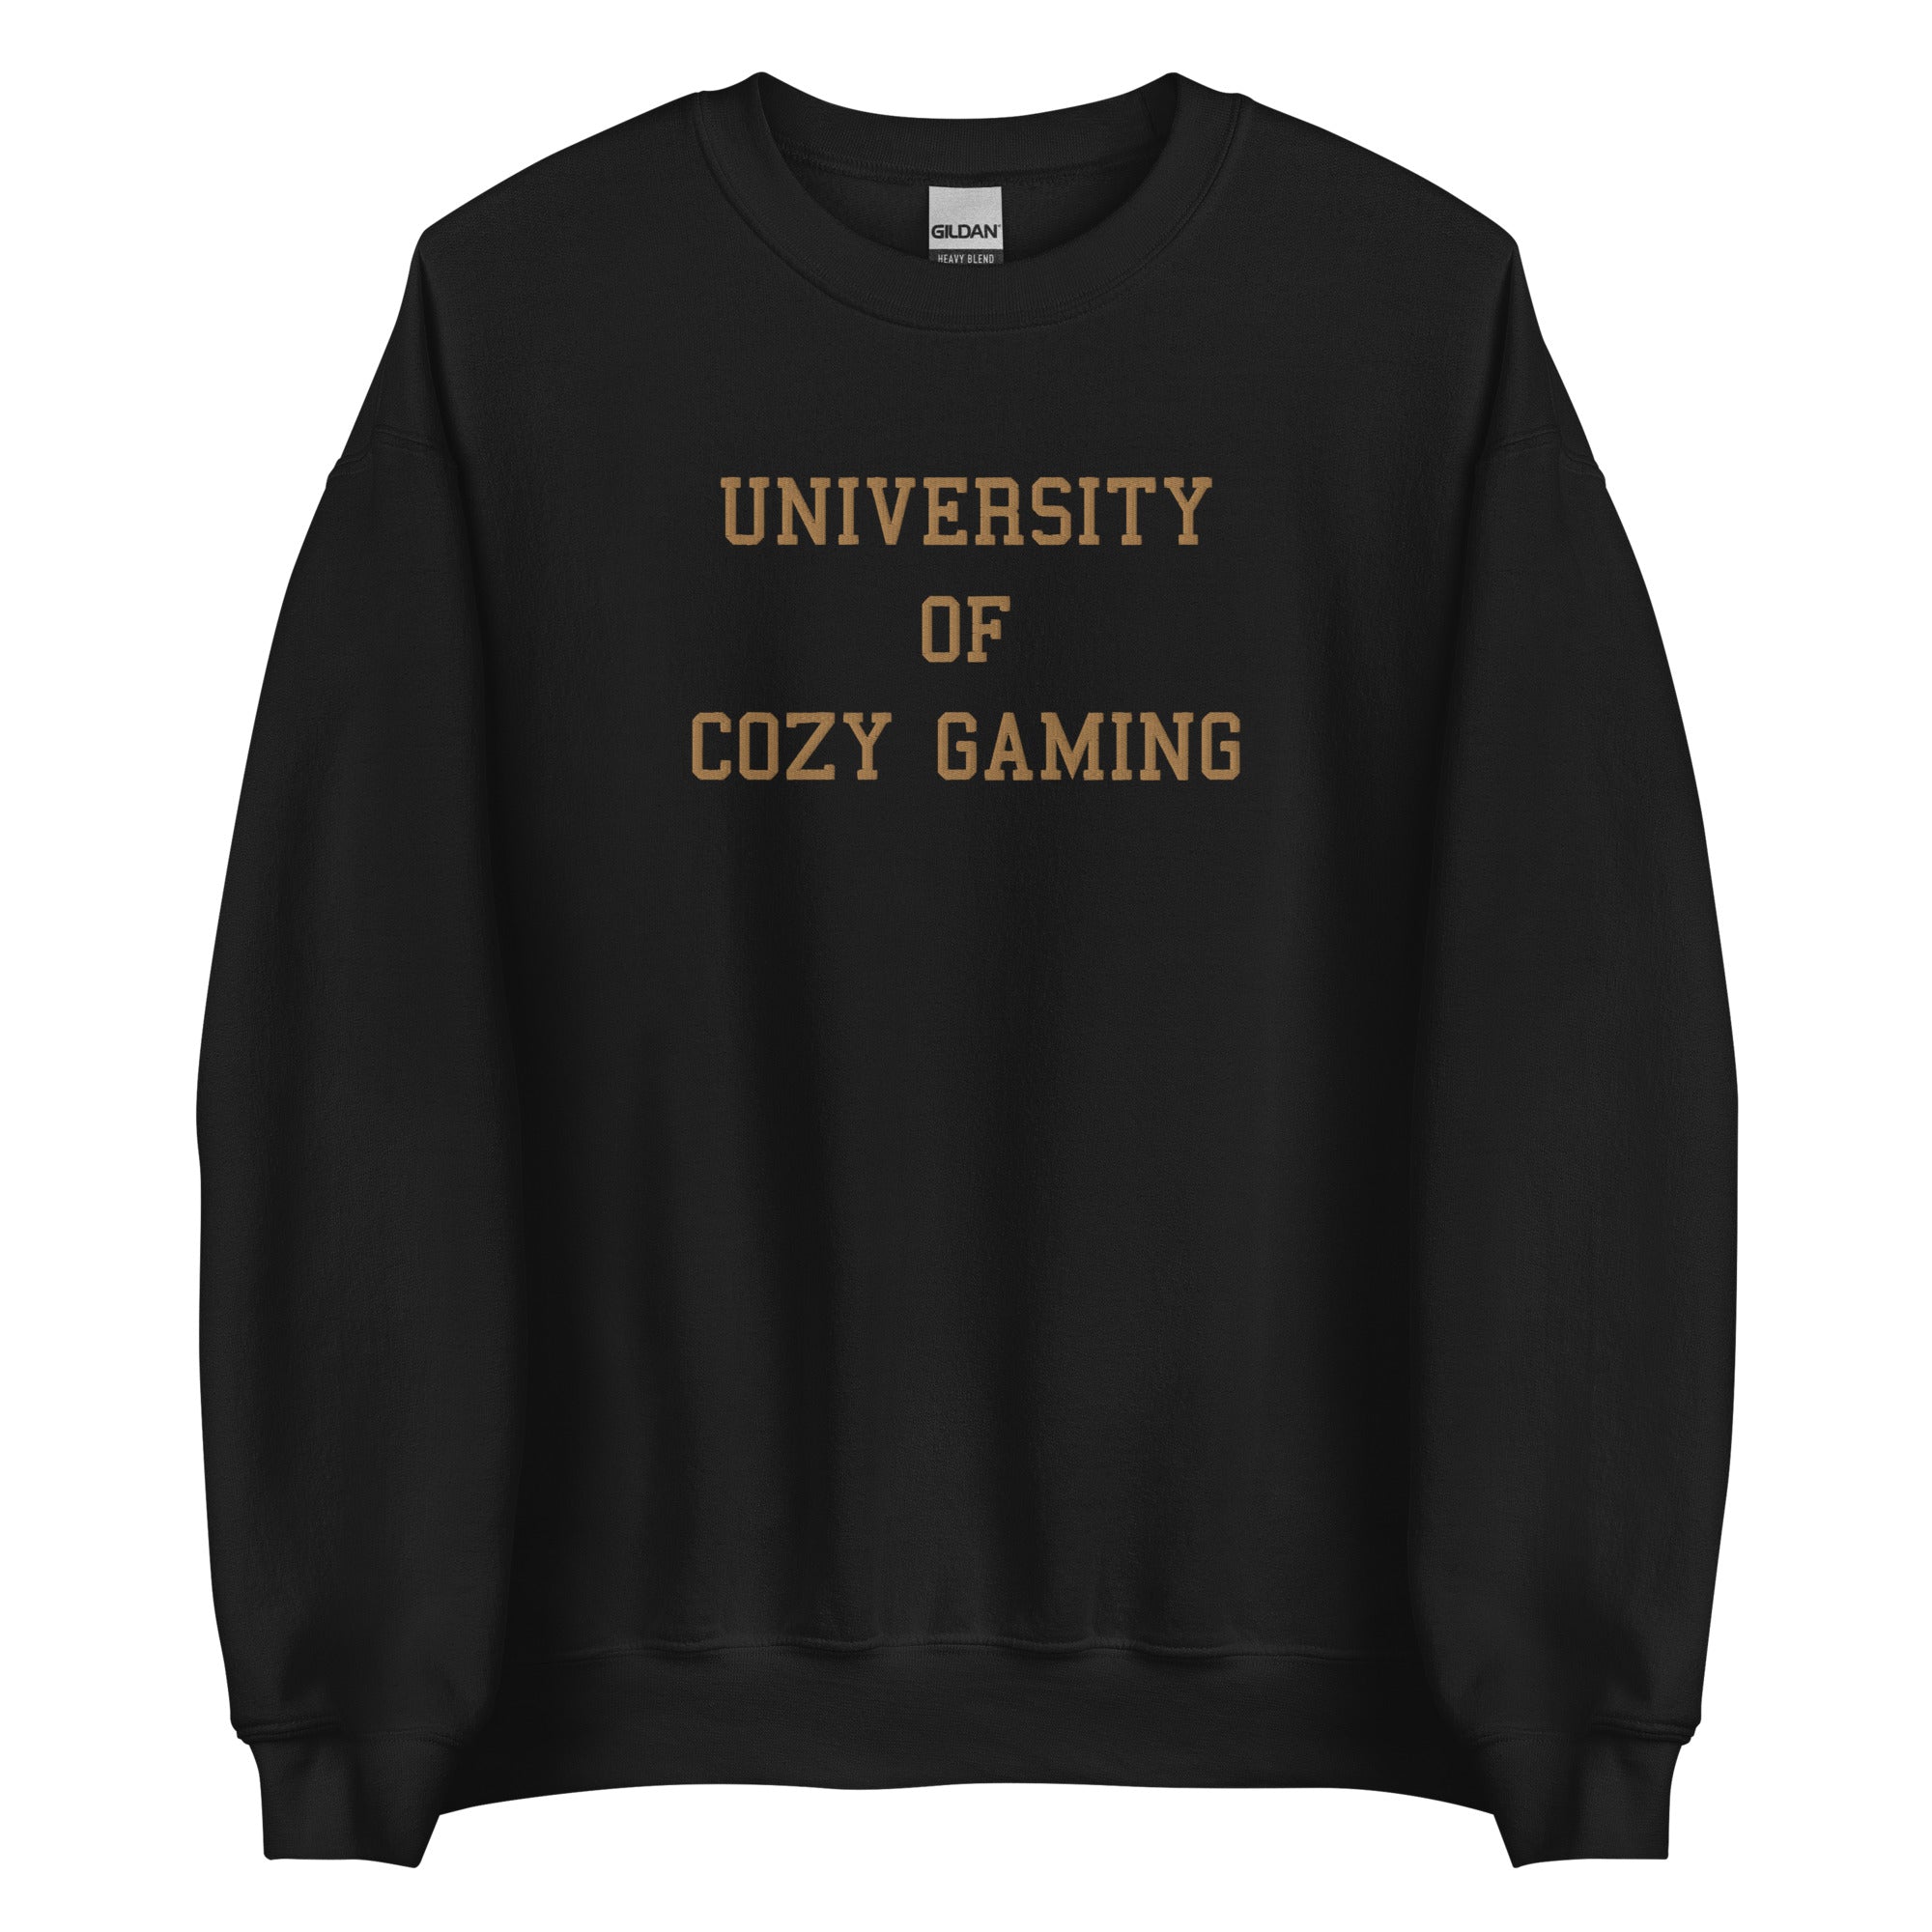 University of Cozy Gaming | Embroidered Unisex Sweatshirt | Coy Gamer Threads and Thistles Inventory Black S 